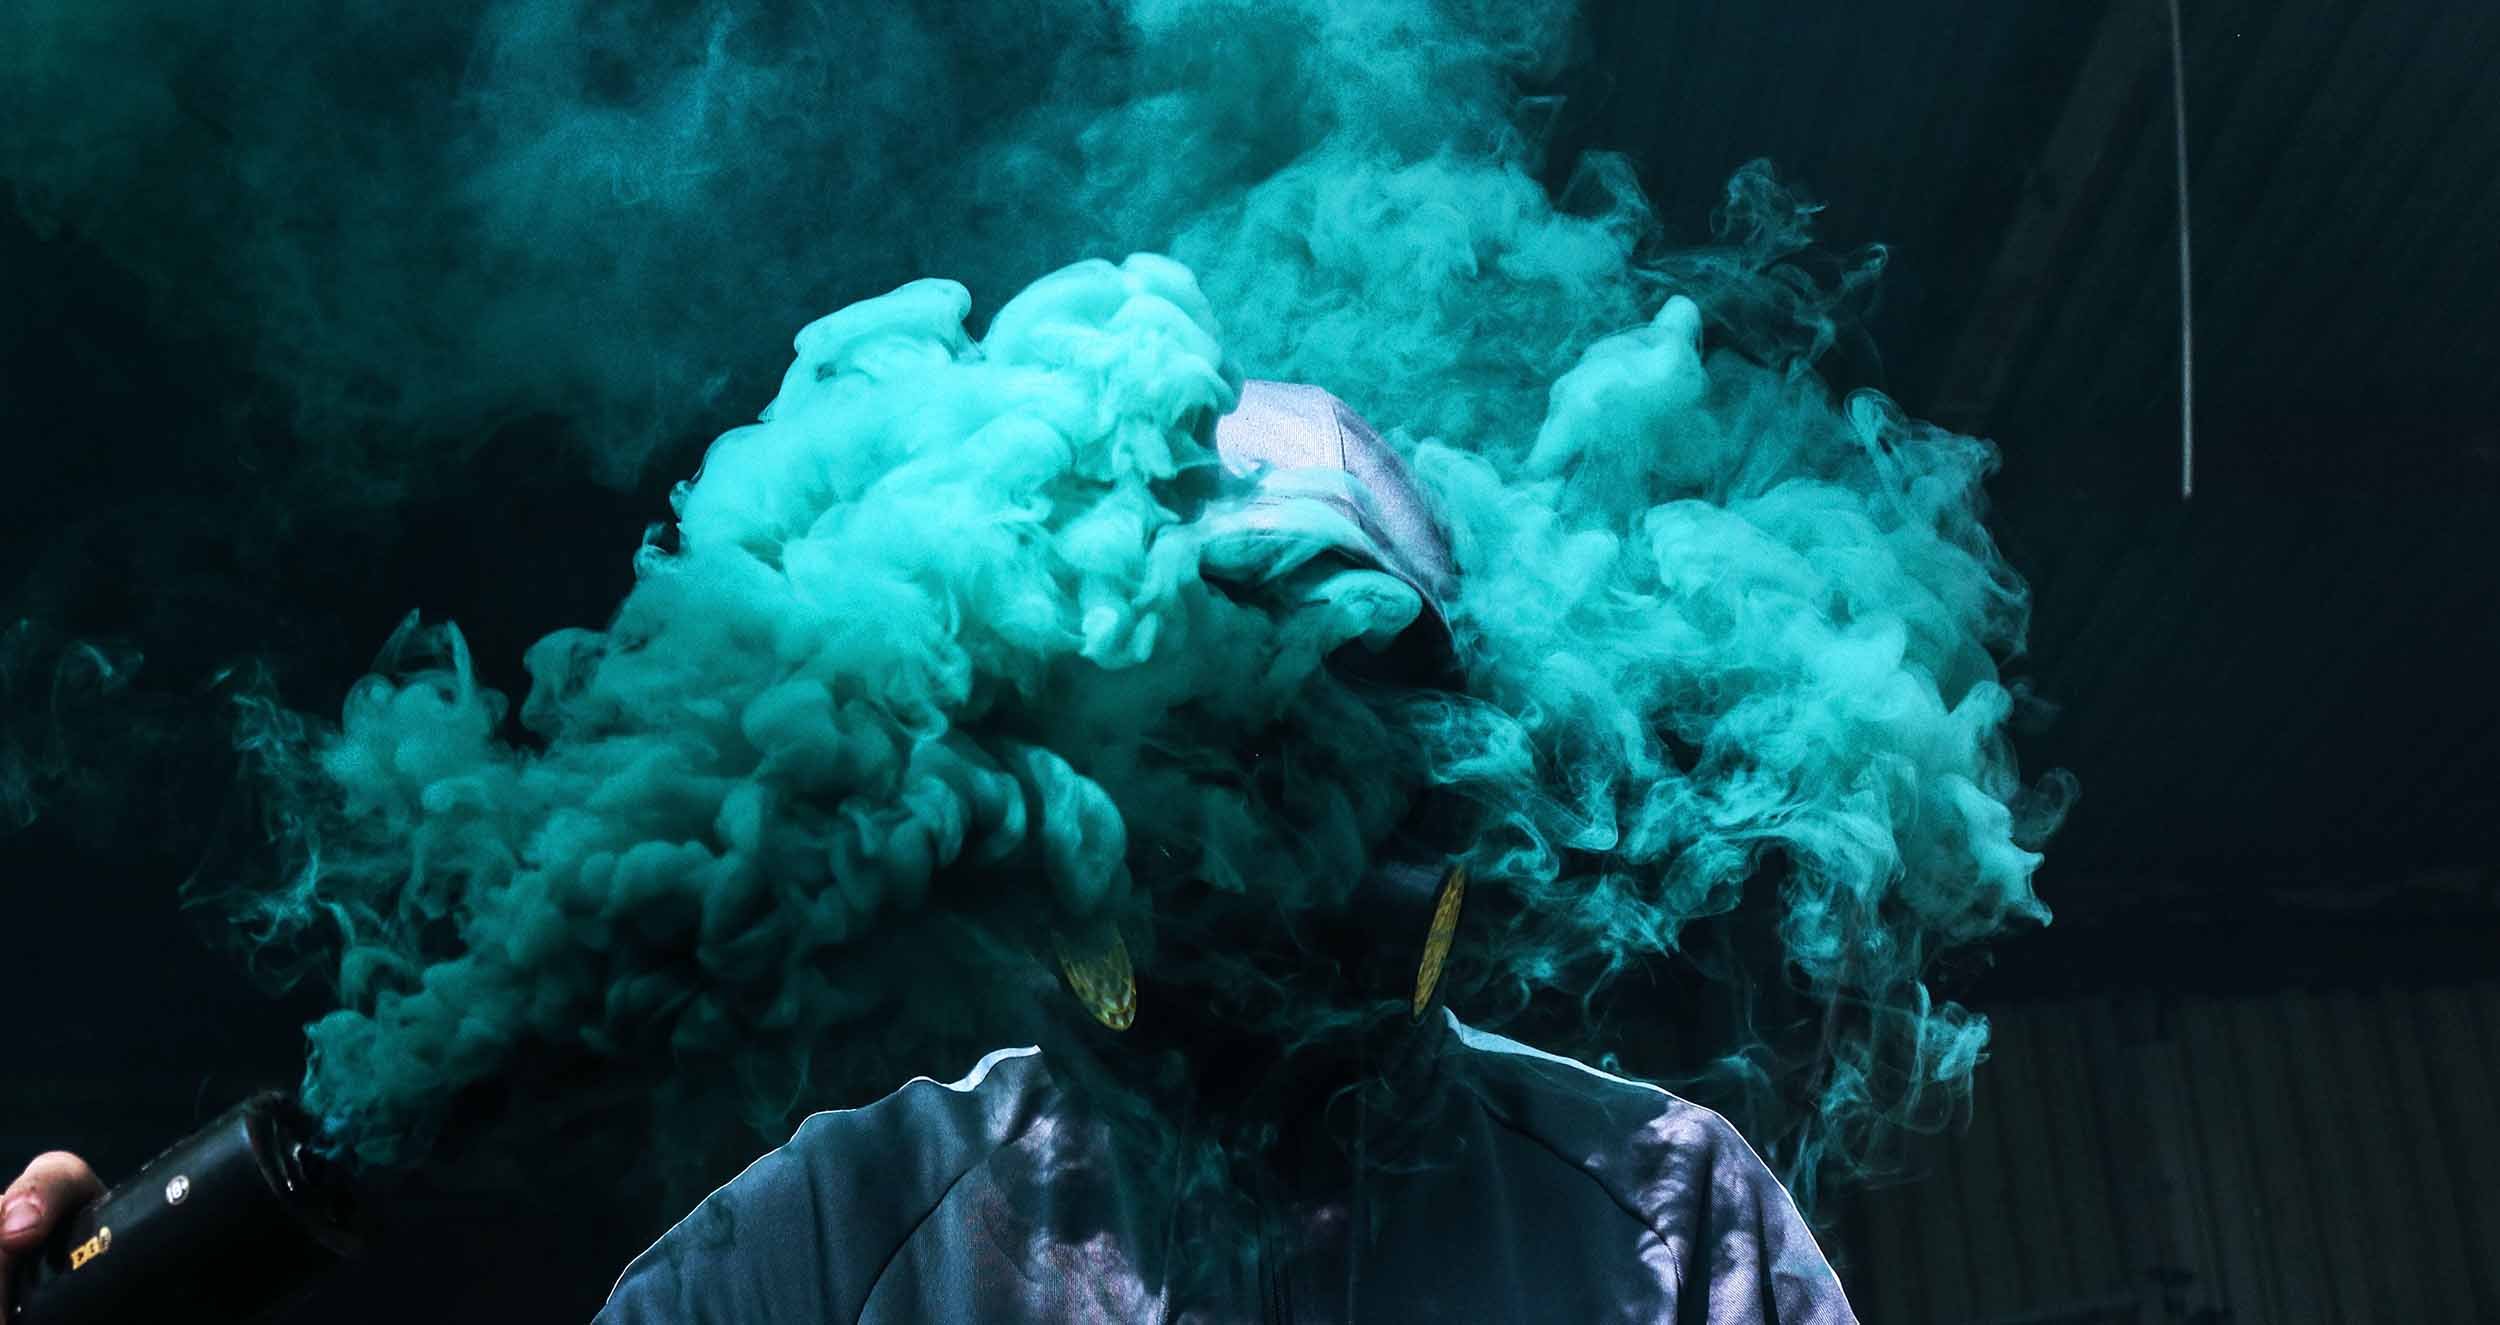 Hooded person projecting teal smoke in front of head Image by Tom Roberts (dsQEmEfKuFg on unsplash.com)